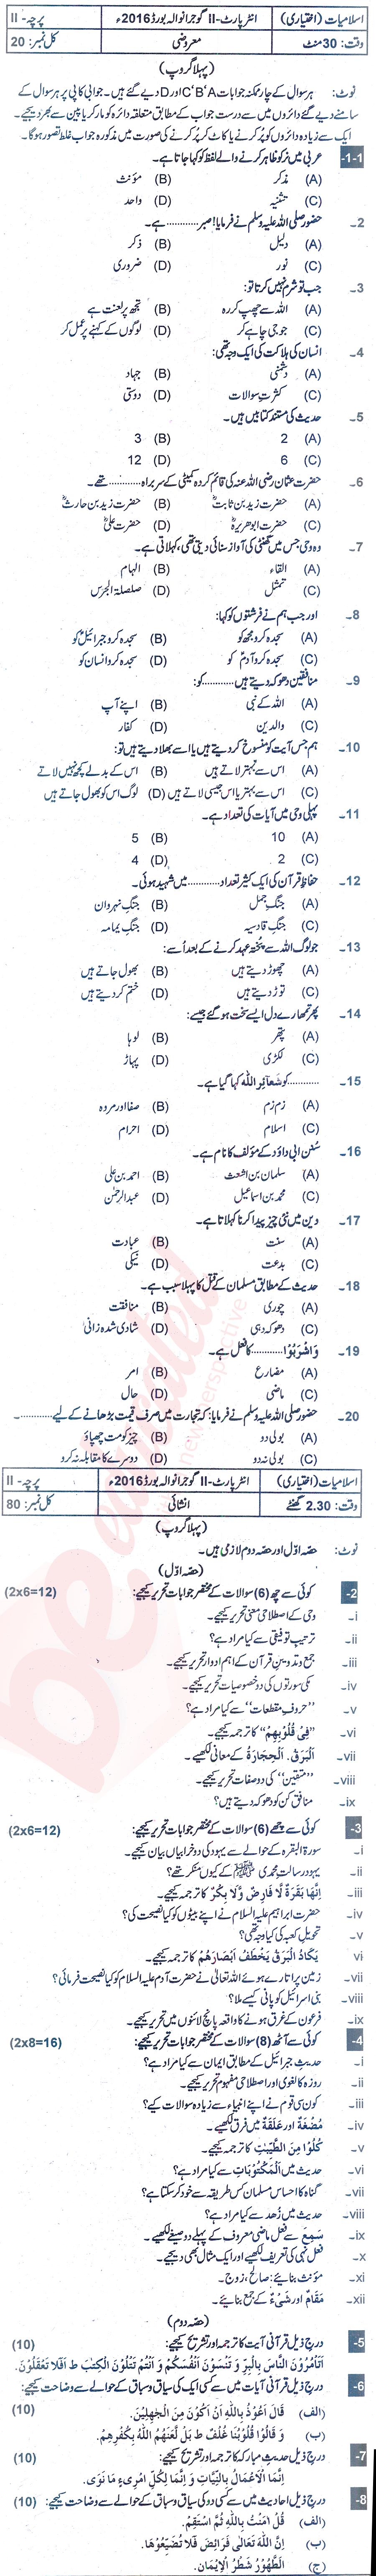 Islamiat Elective FA Part 2 Past Paper Group 1 BISE Gujranwala 2016